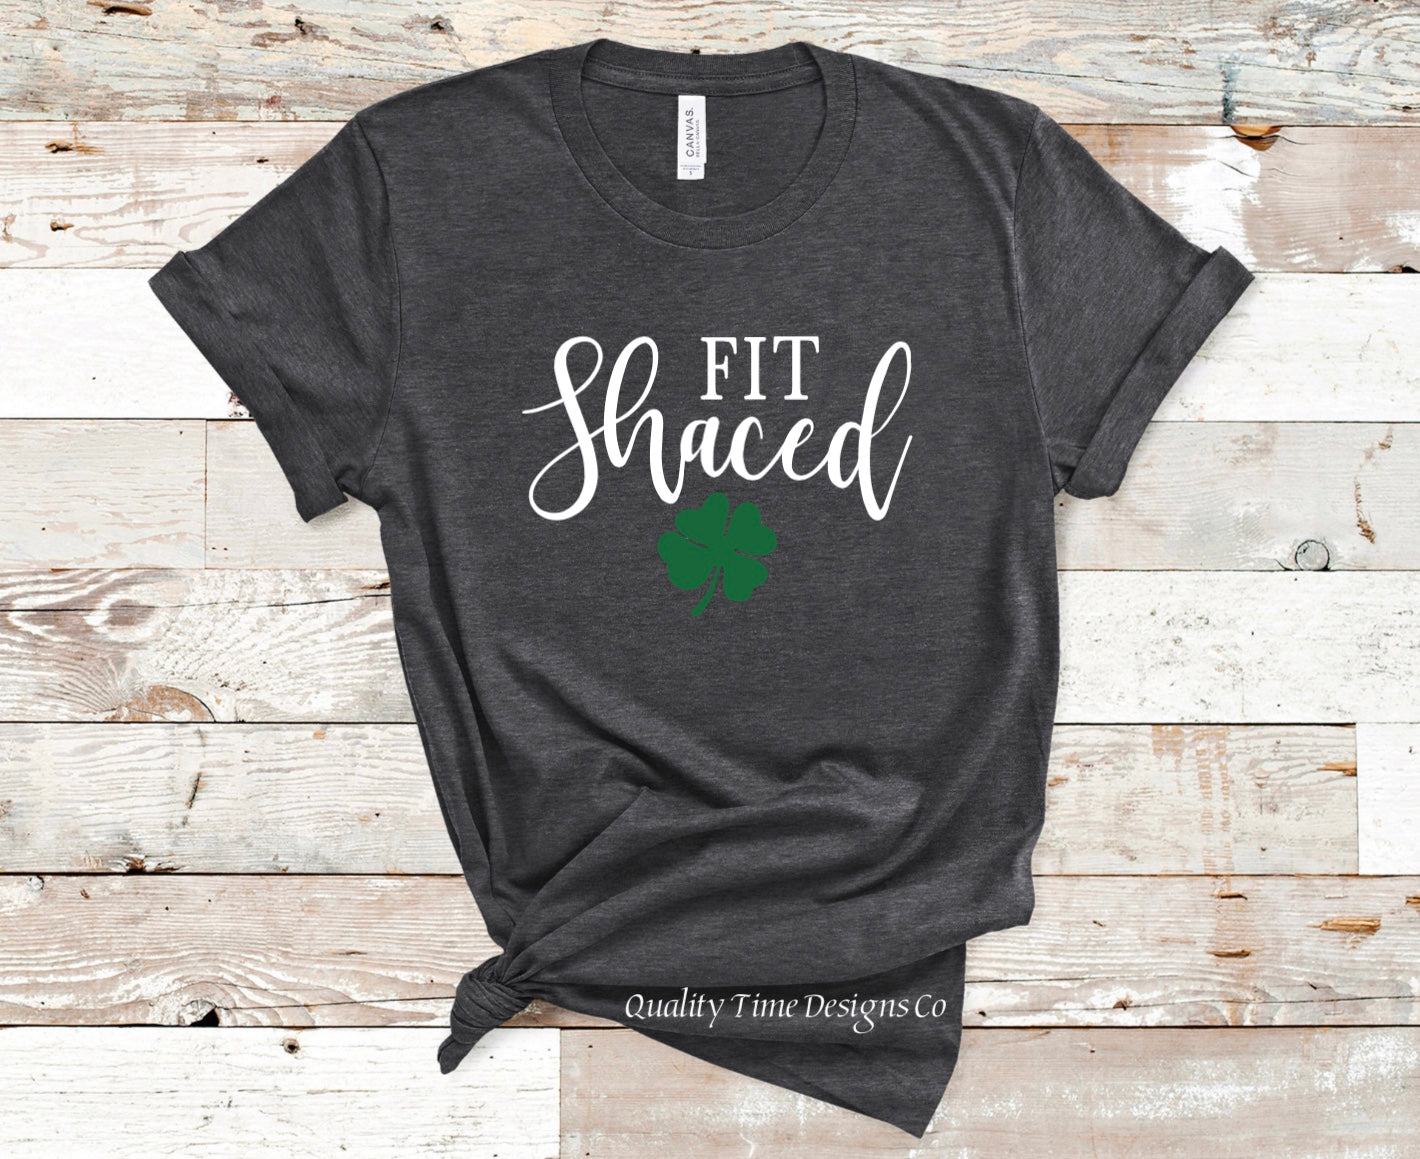 Fit shaced t-shirt 